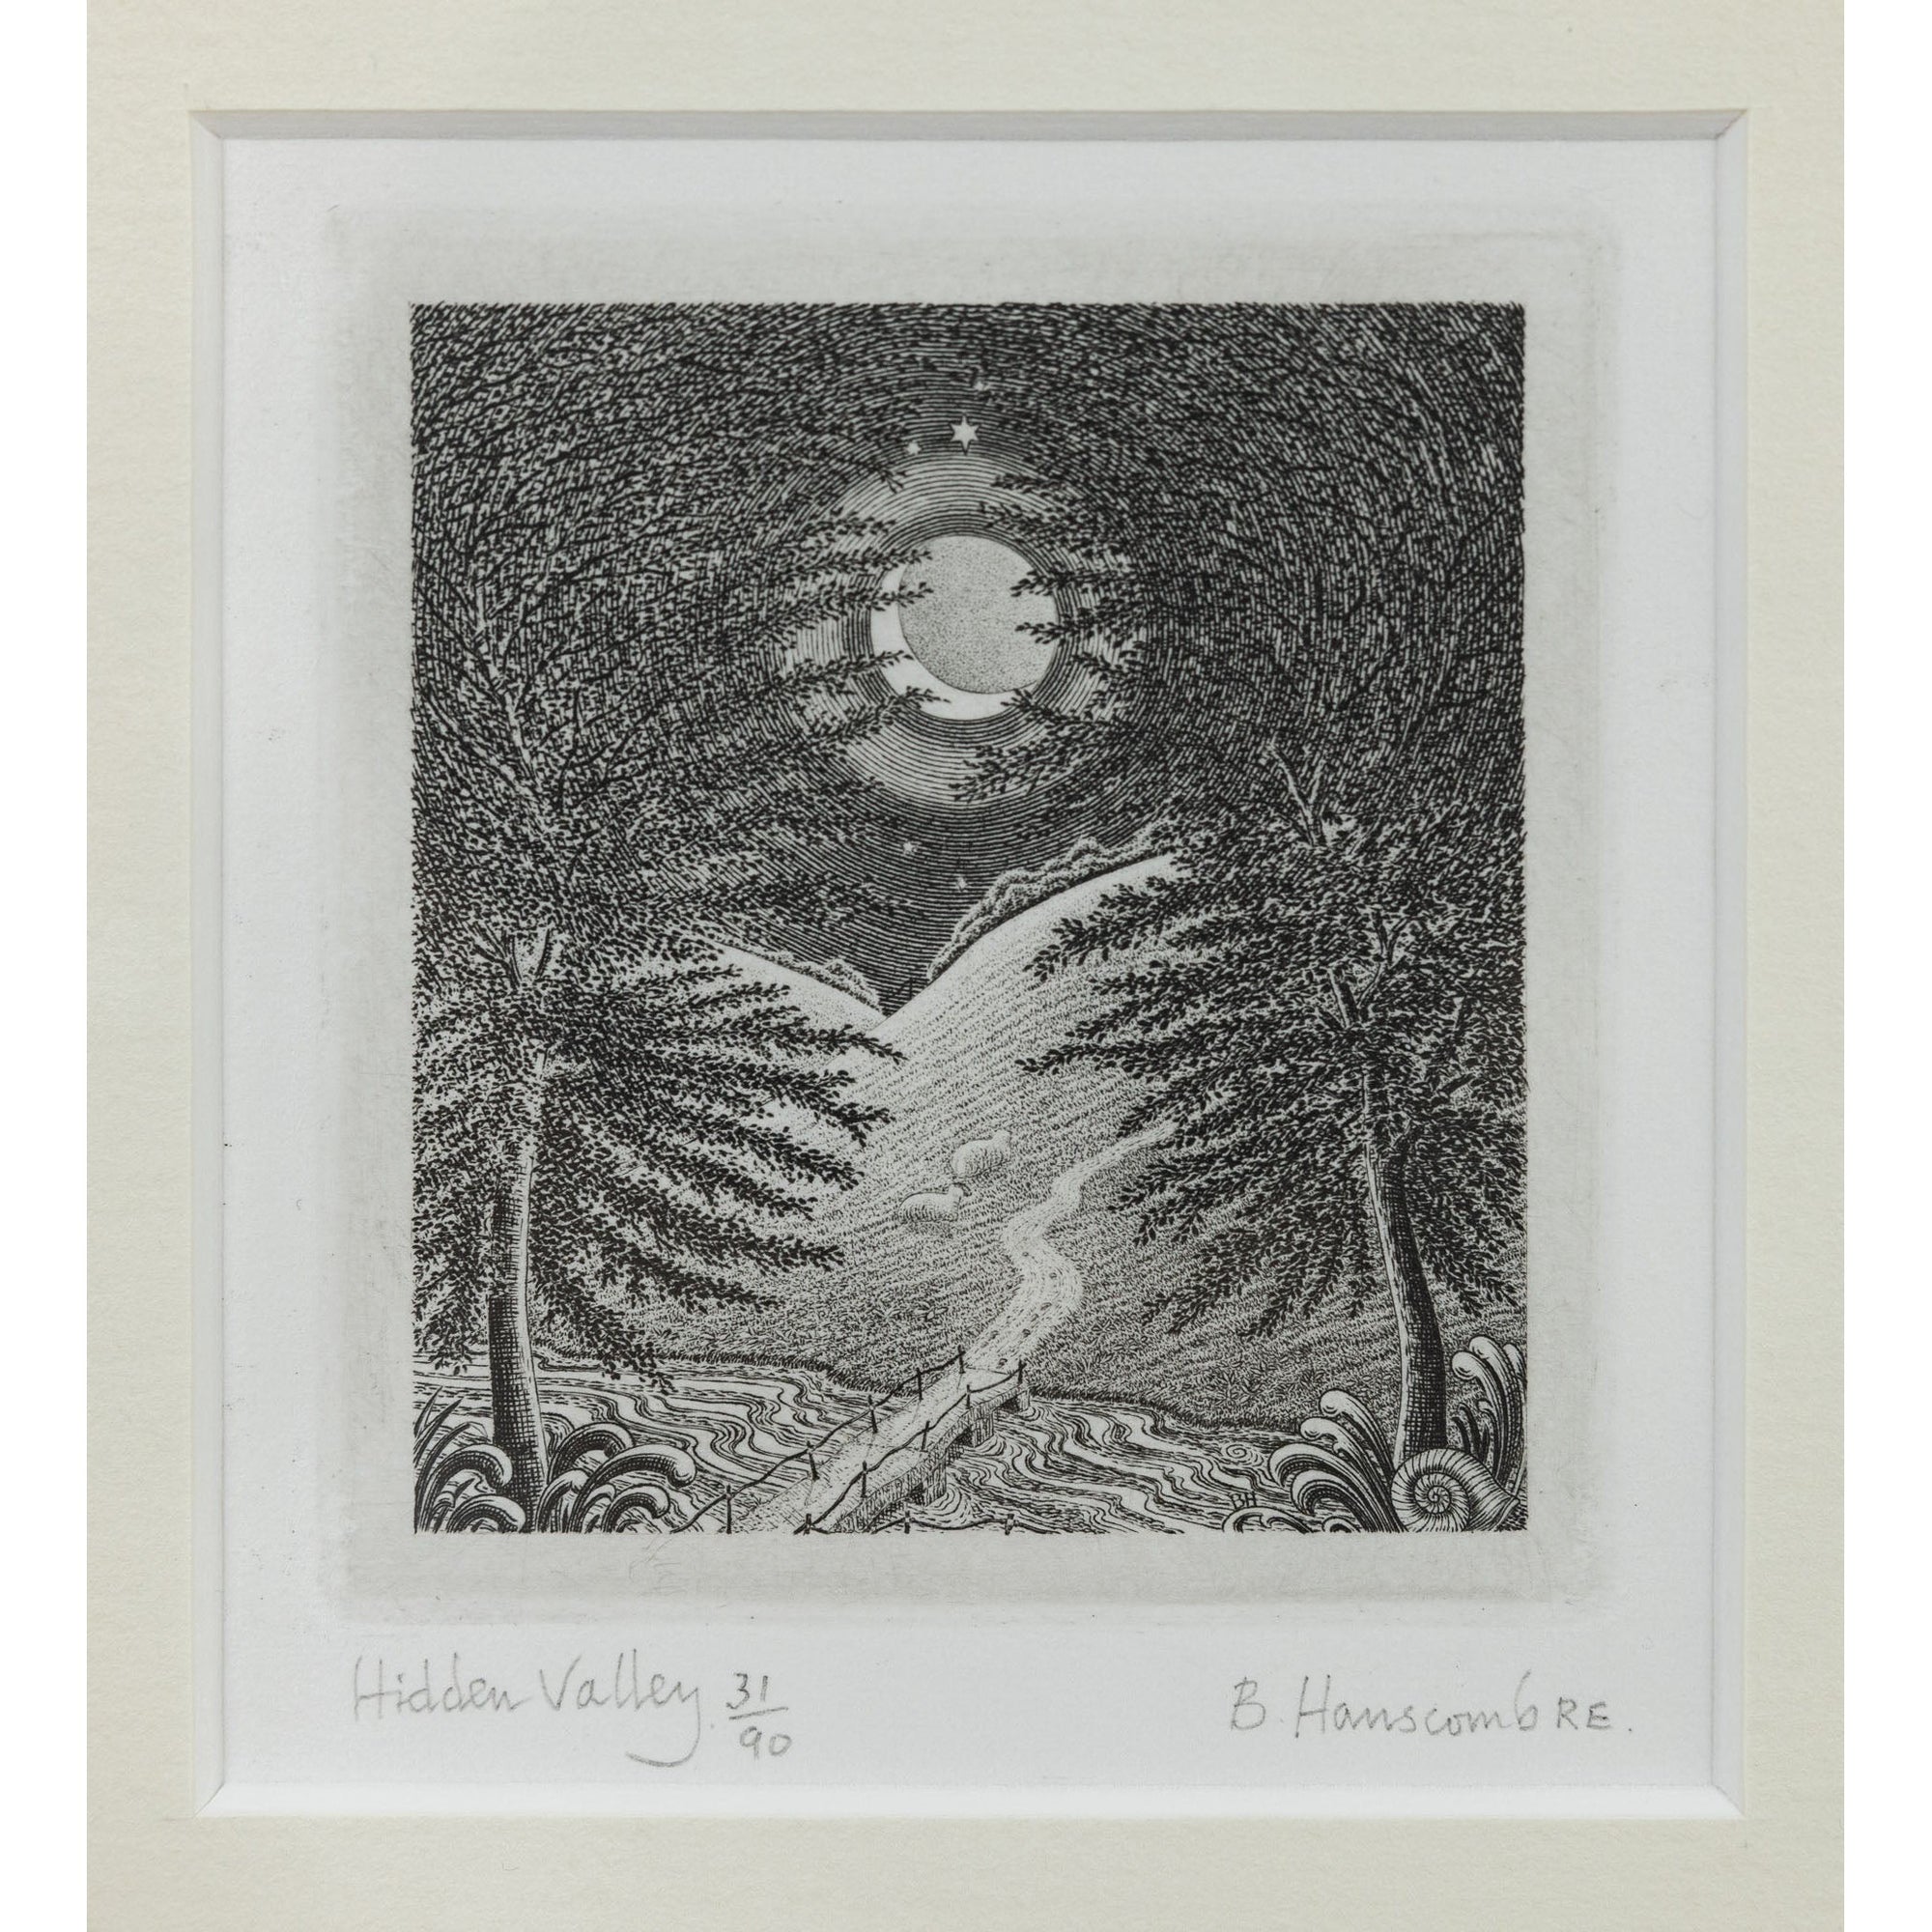 'Hidden Valley' copperplate engraving by Brian Hanscomb, available at Padstow Gallery, Cornwall